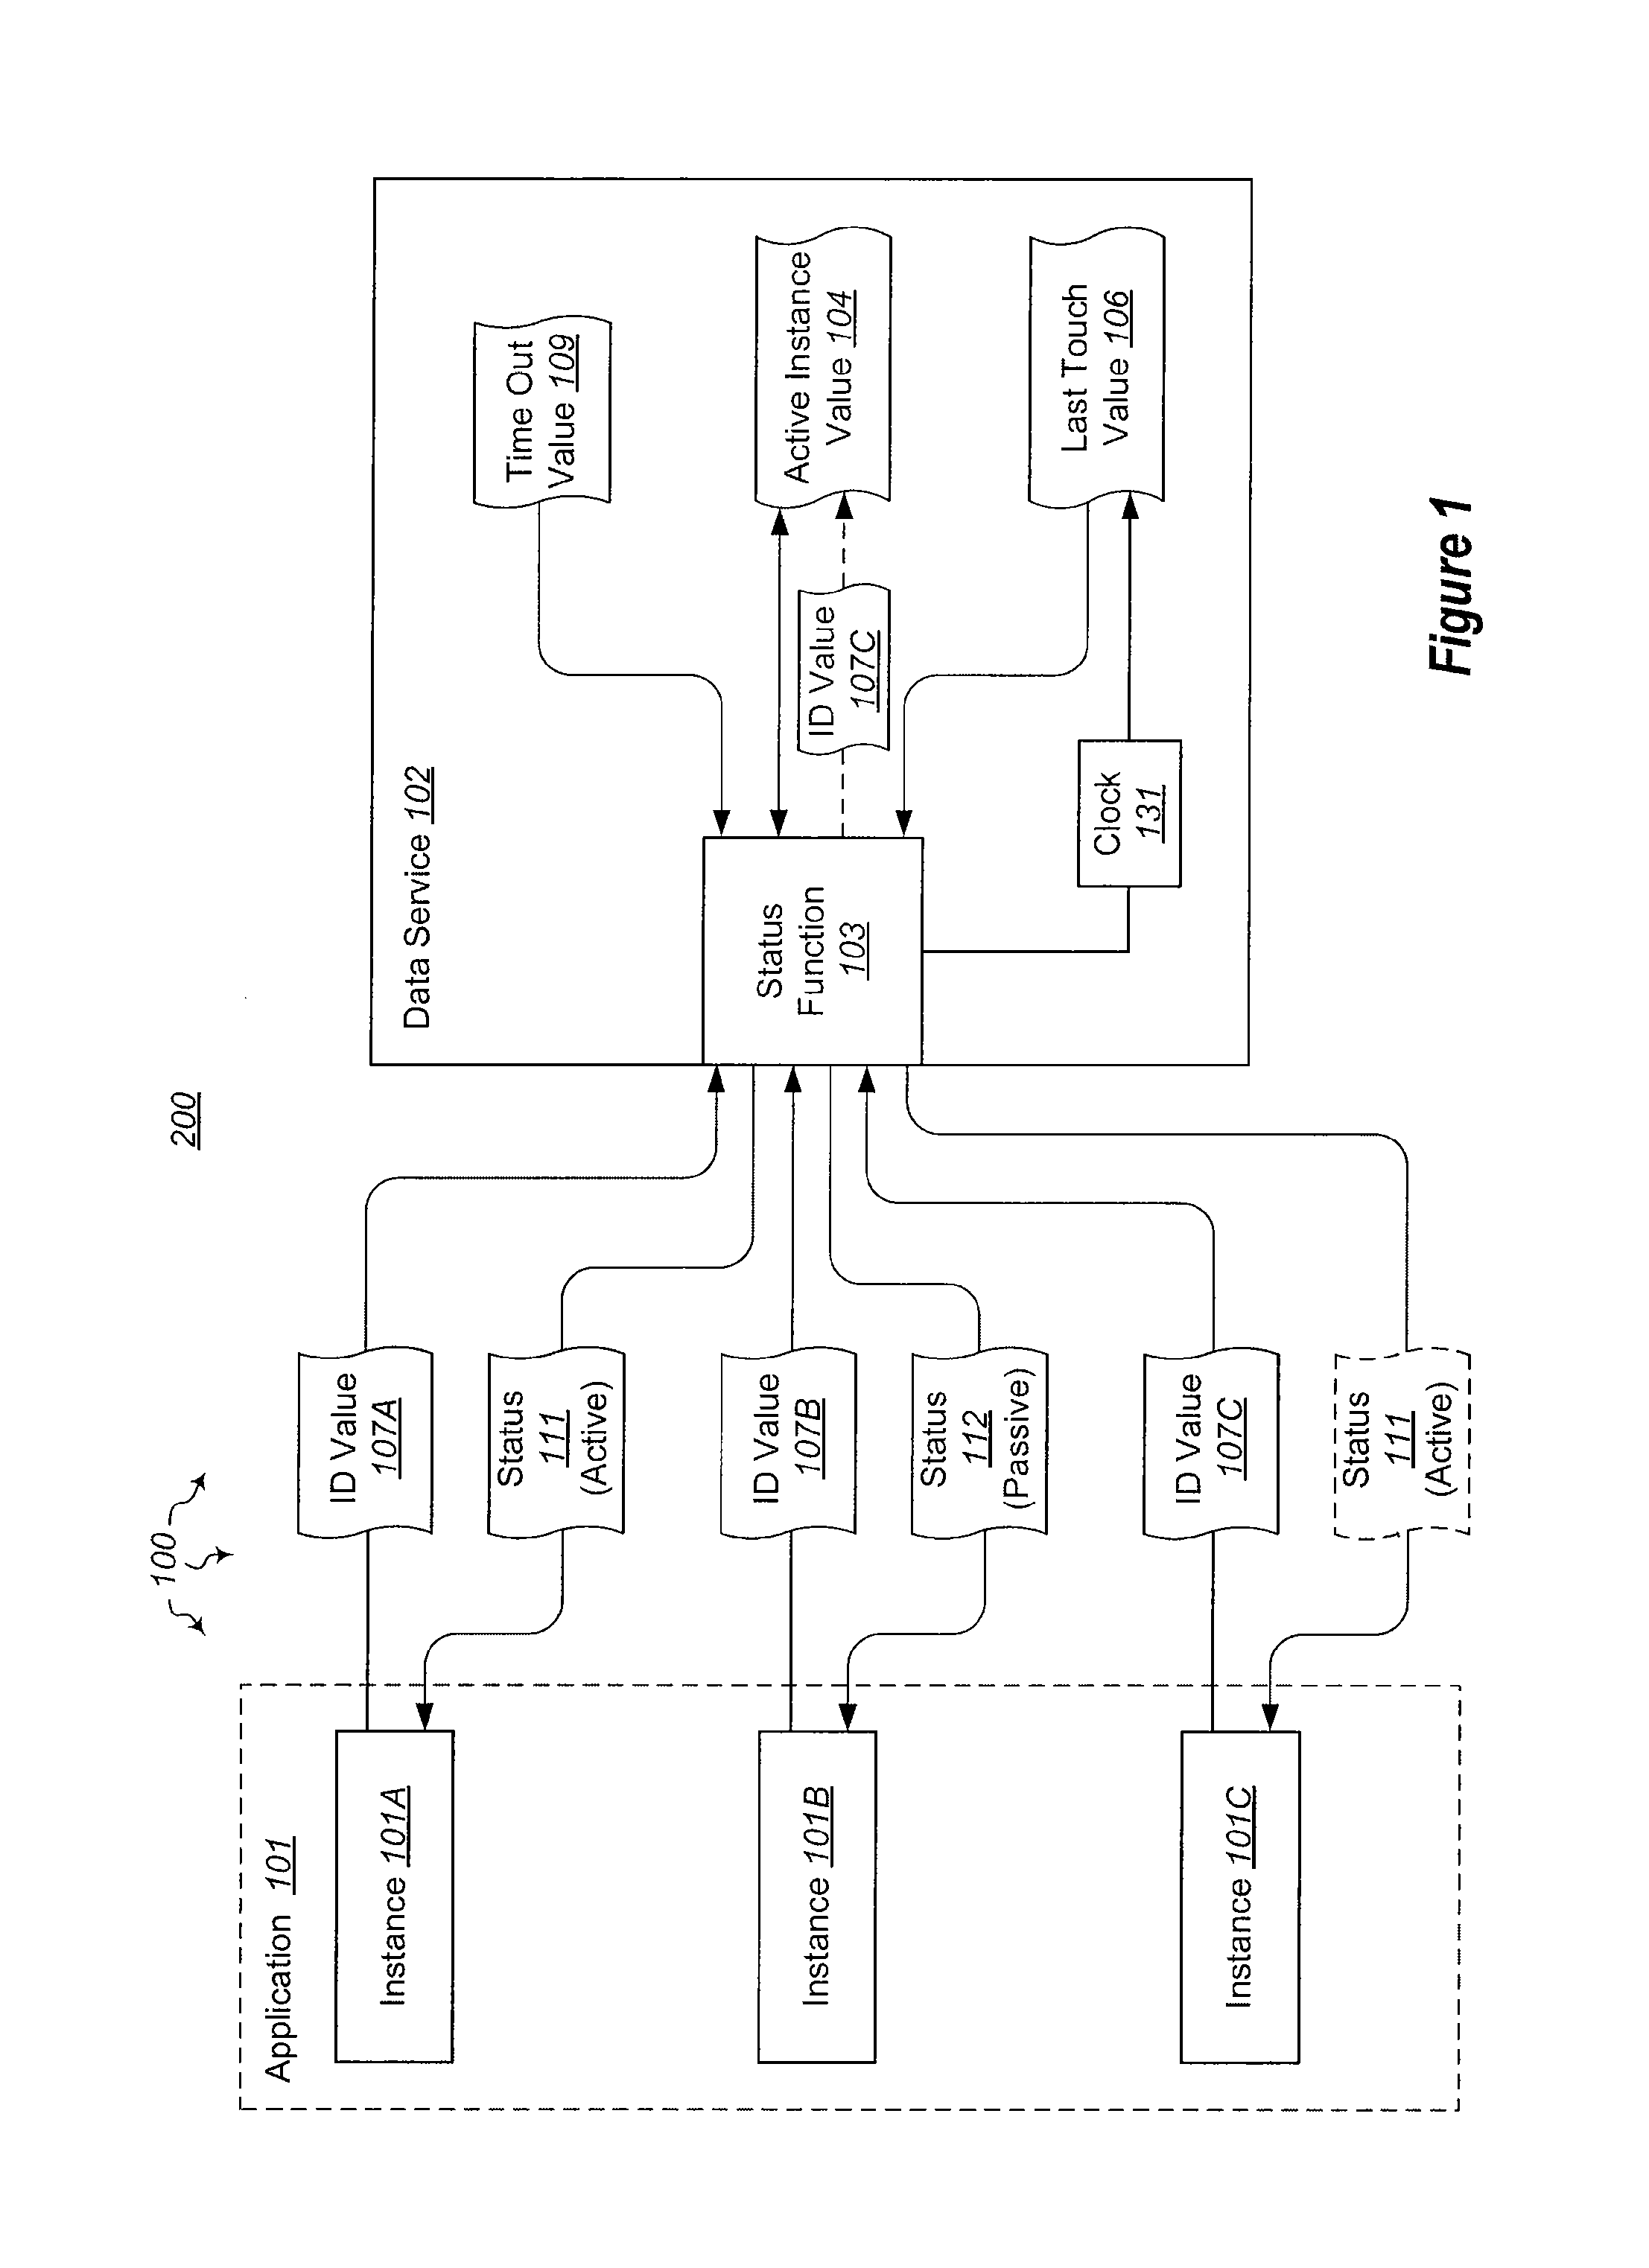 Synchronized failover for active-passive applications